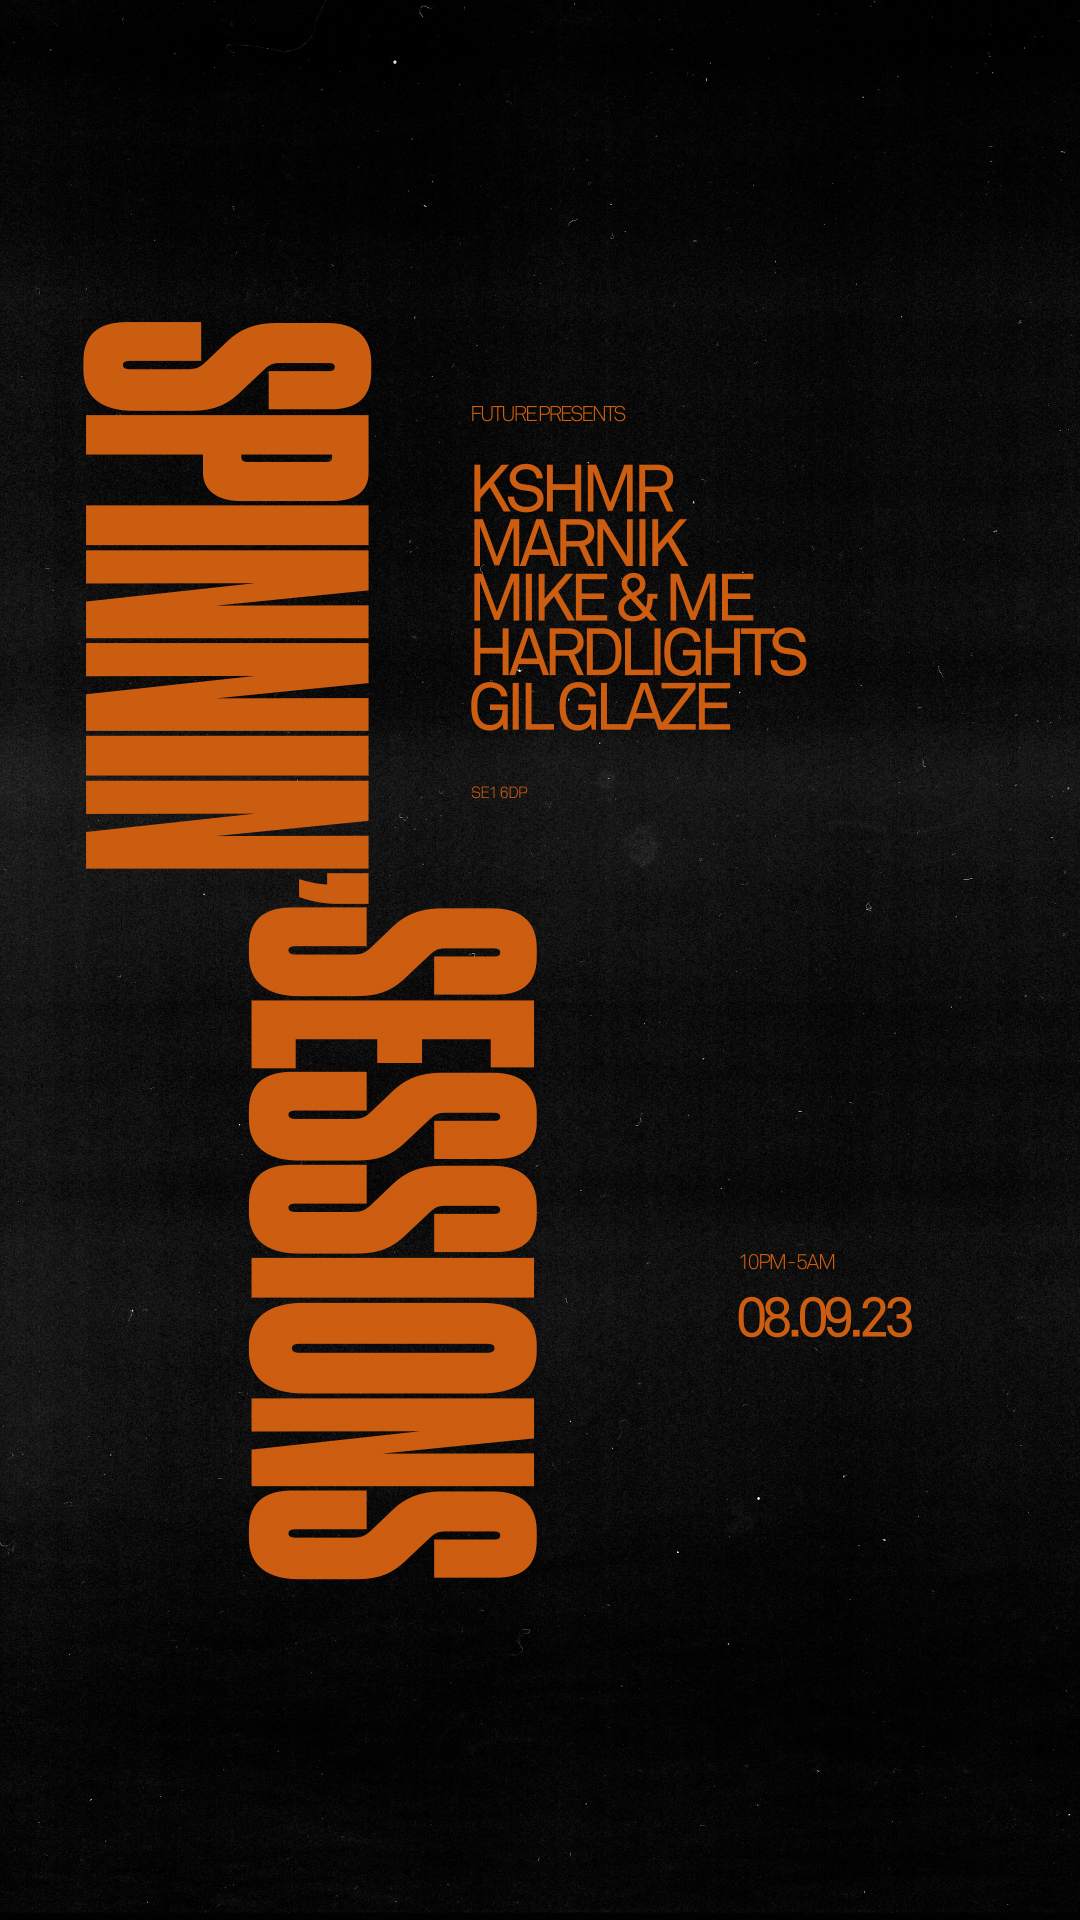 Spinnin' Sessions presents KSHMR, Marnik, Mike & Me - フライヤー表